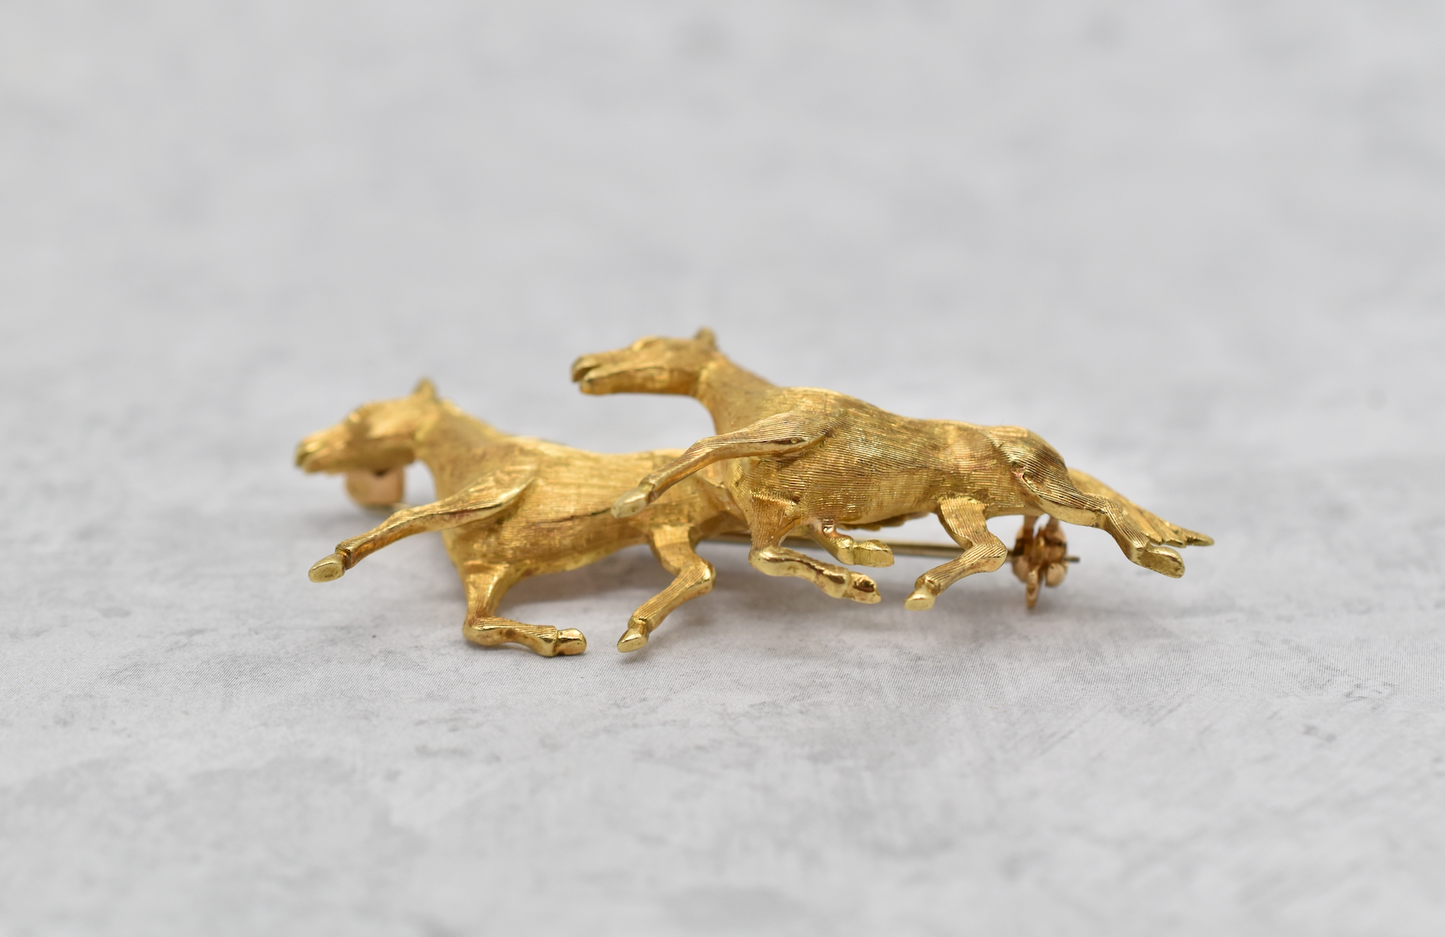 18k Yellow Gold Double Horse Brooch - 9.8g